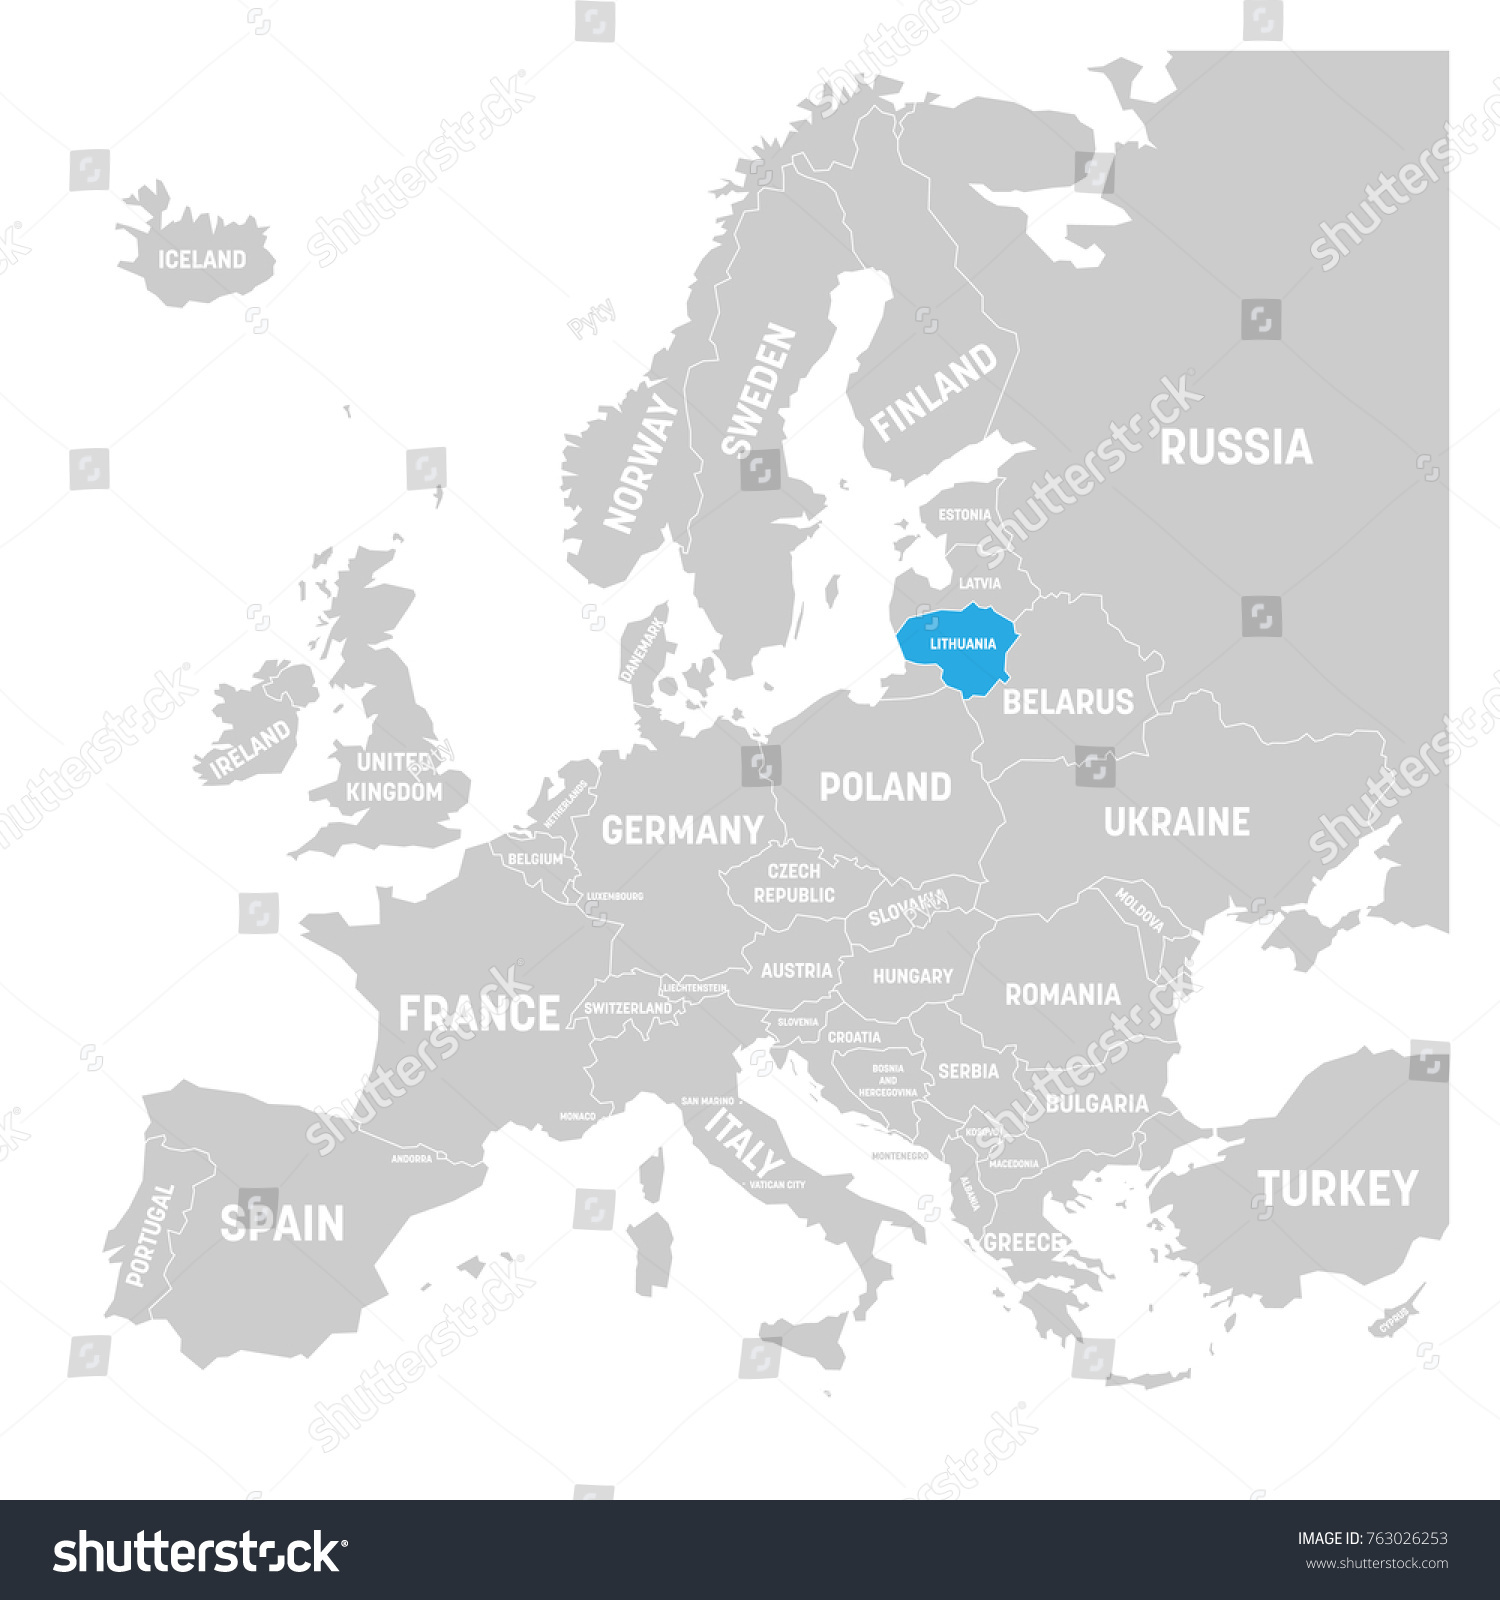 Lithuania marked by blue in grey political map of Europe. Vector illustration. #763026253